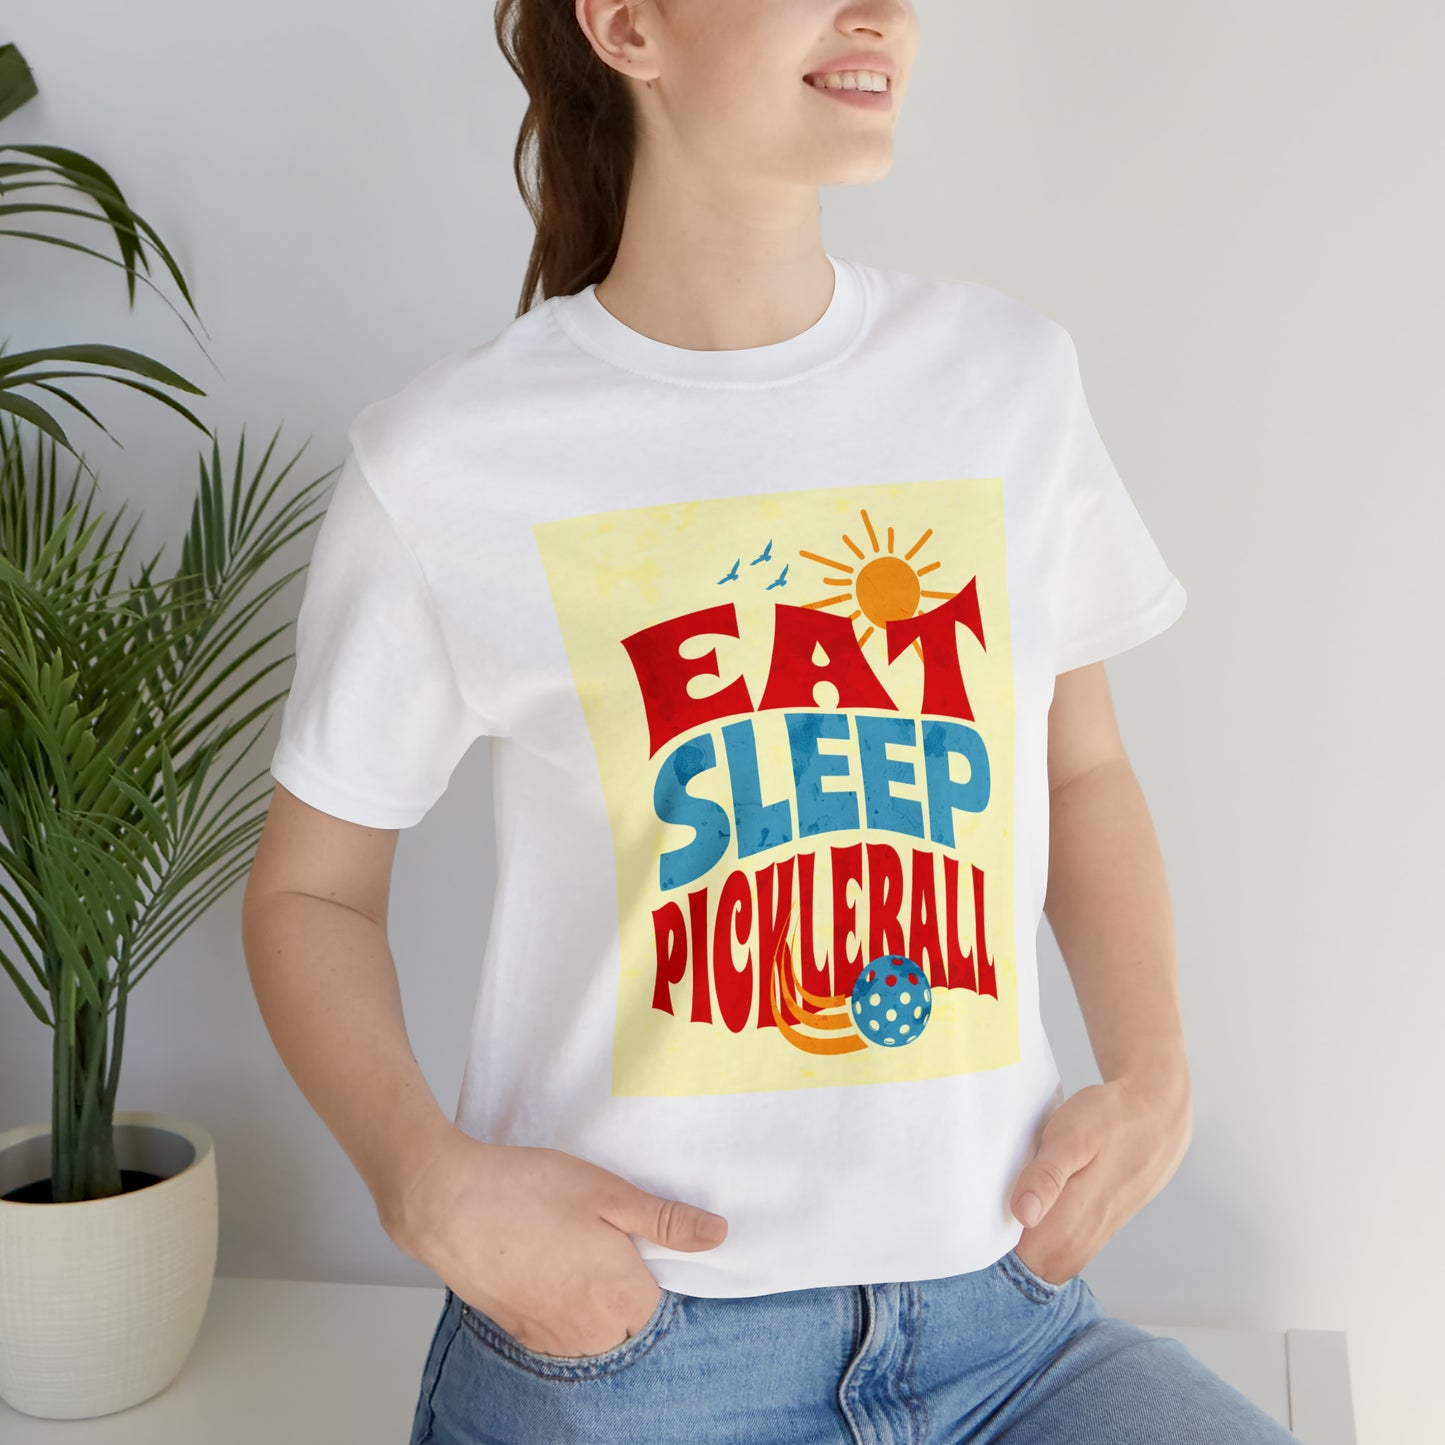 Eat. Sleep. Pickleball: T-Shirt for Passionate Players